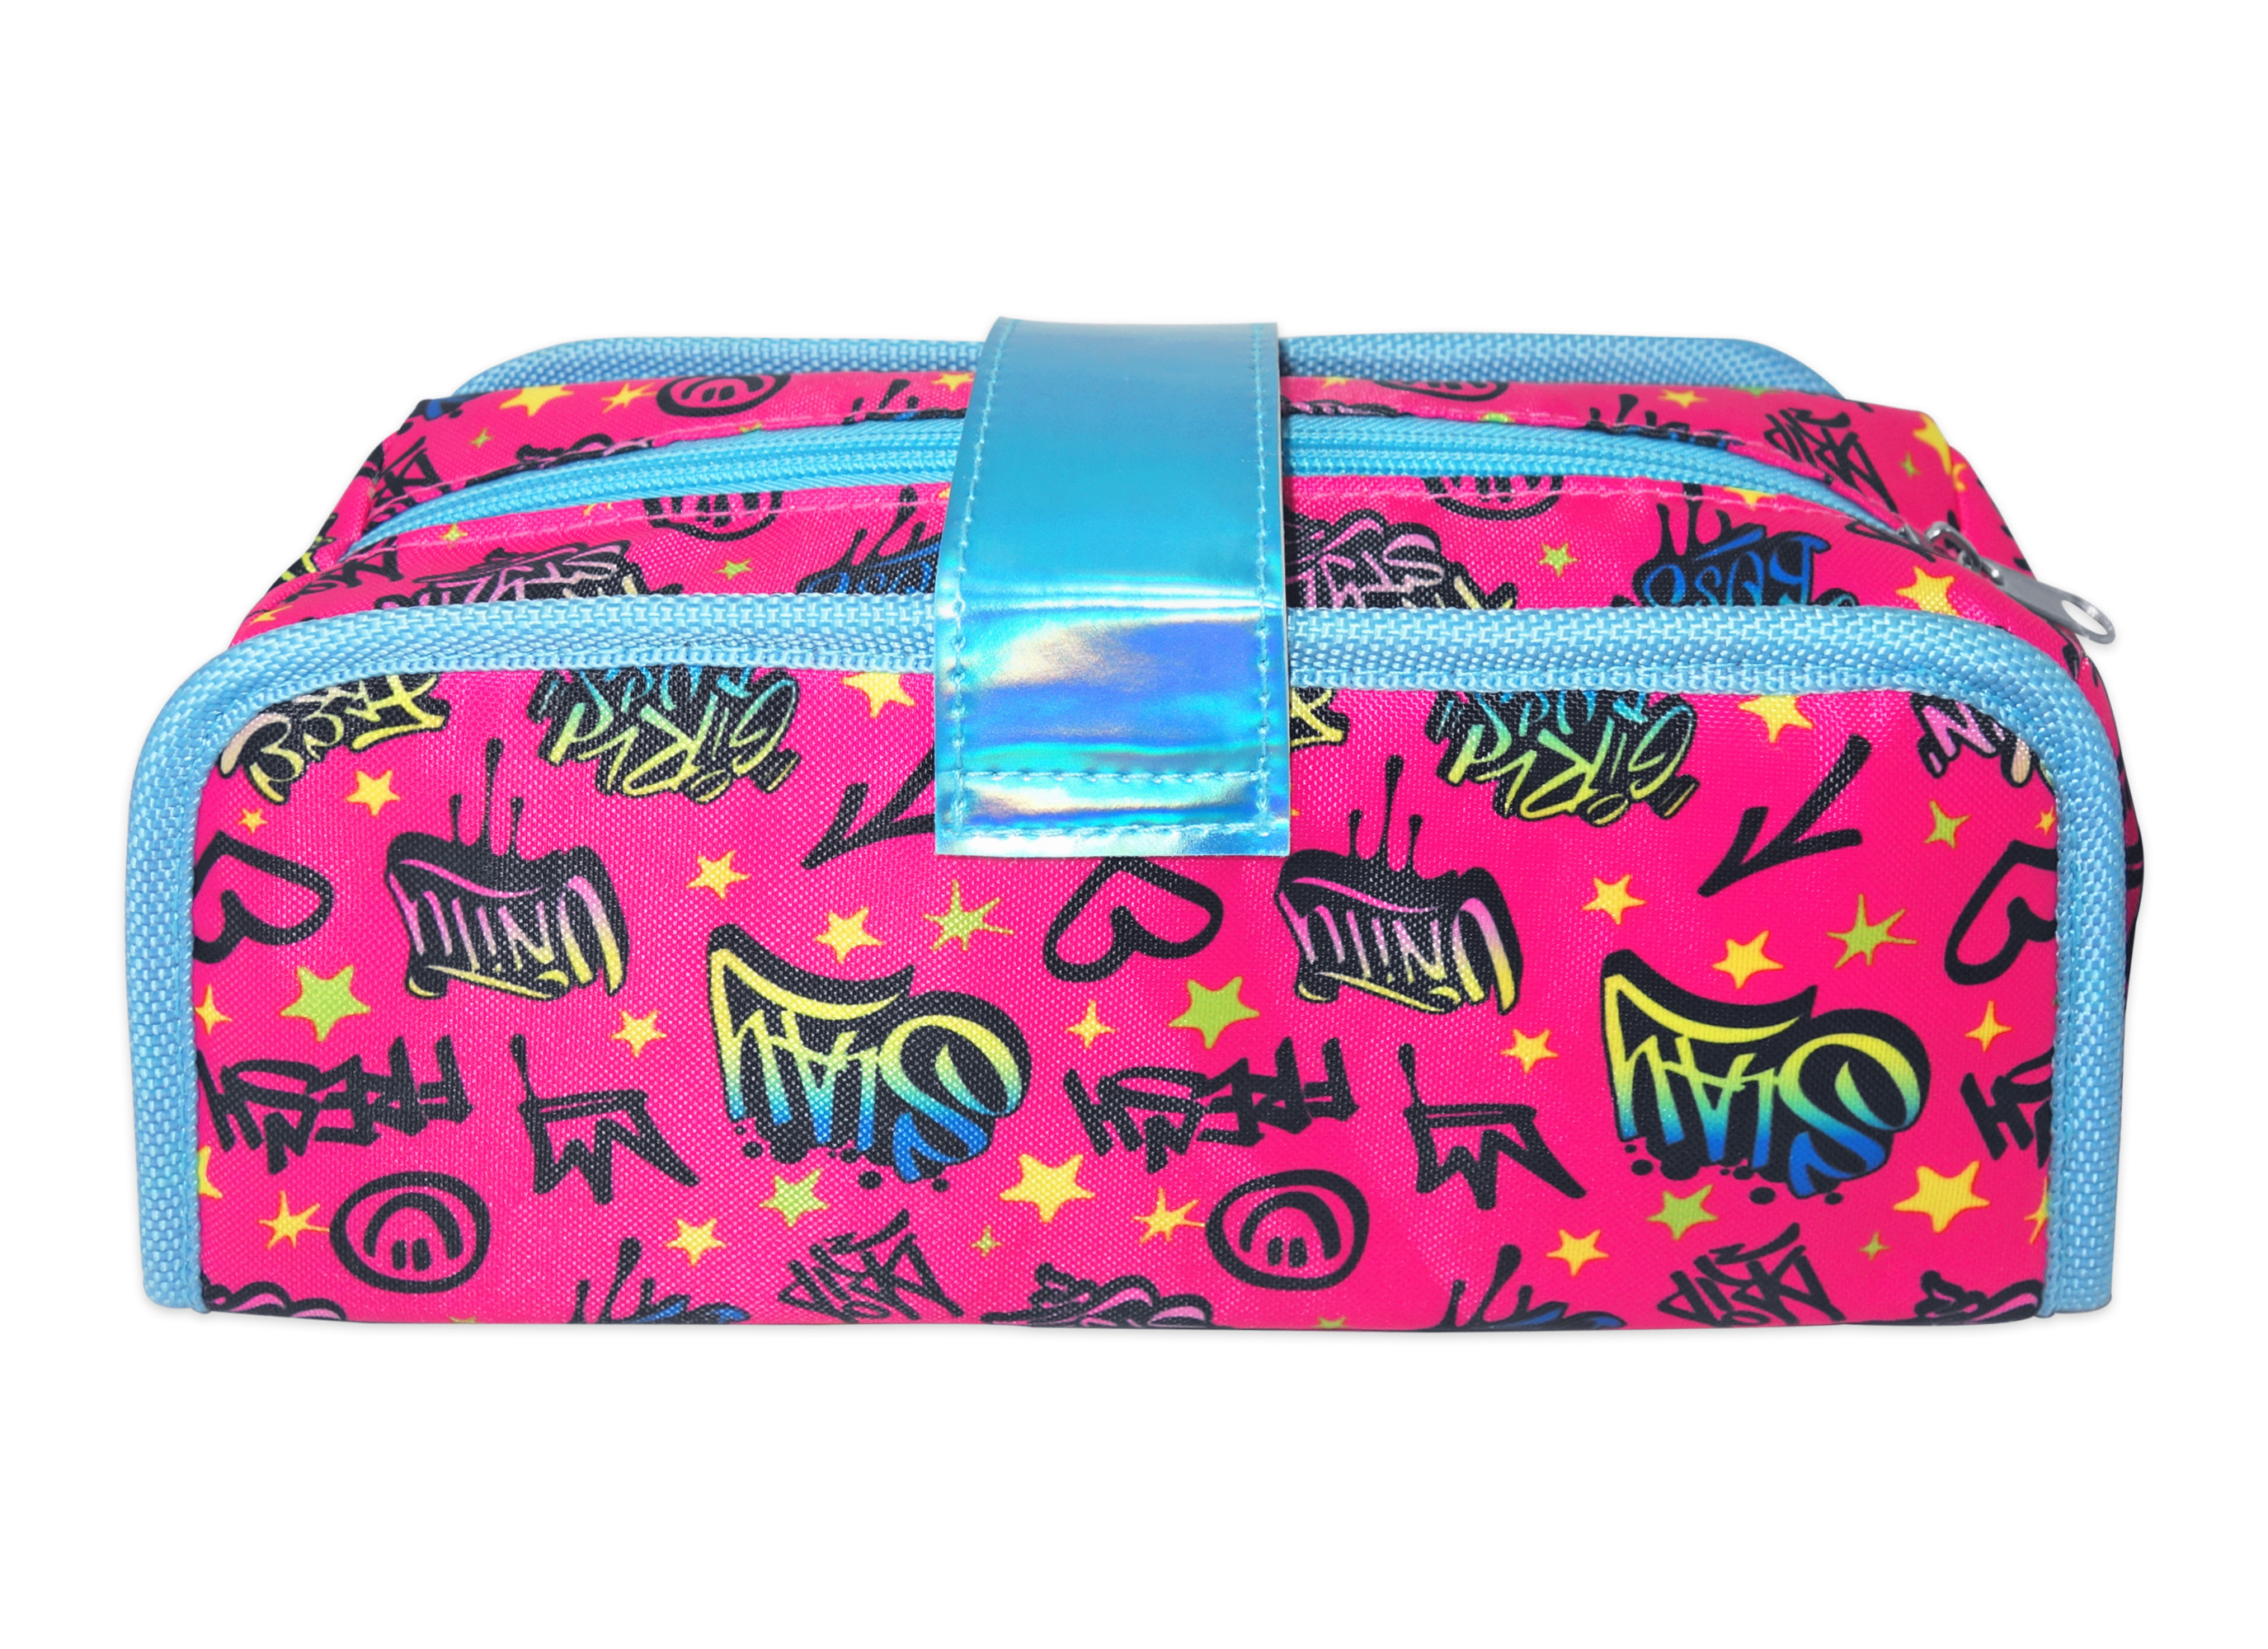 Nickelodeon Lay Lay Utility Pencil Case, Multi-Color, Soft Style, 9-Inches Length by 3.9-Inches High